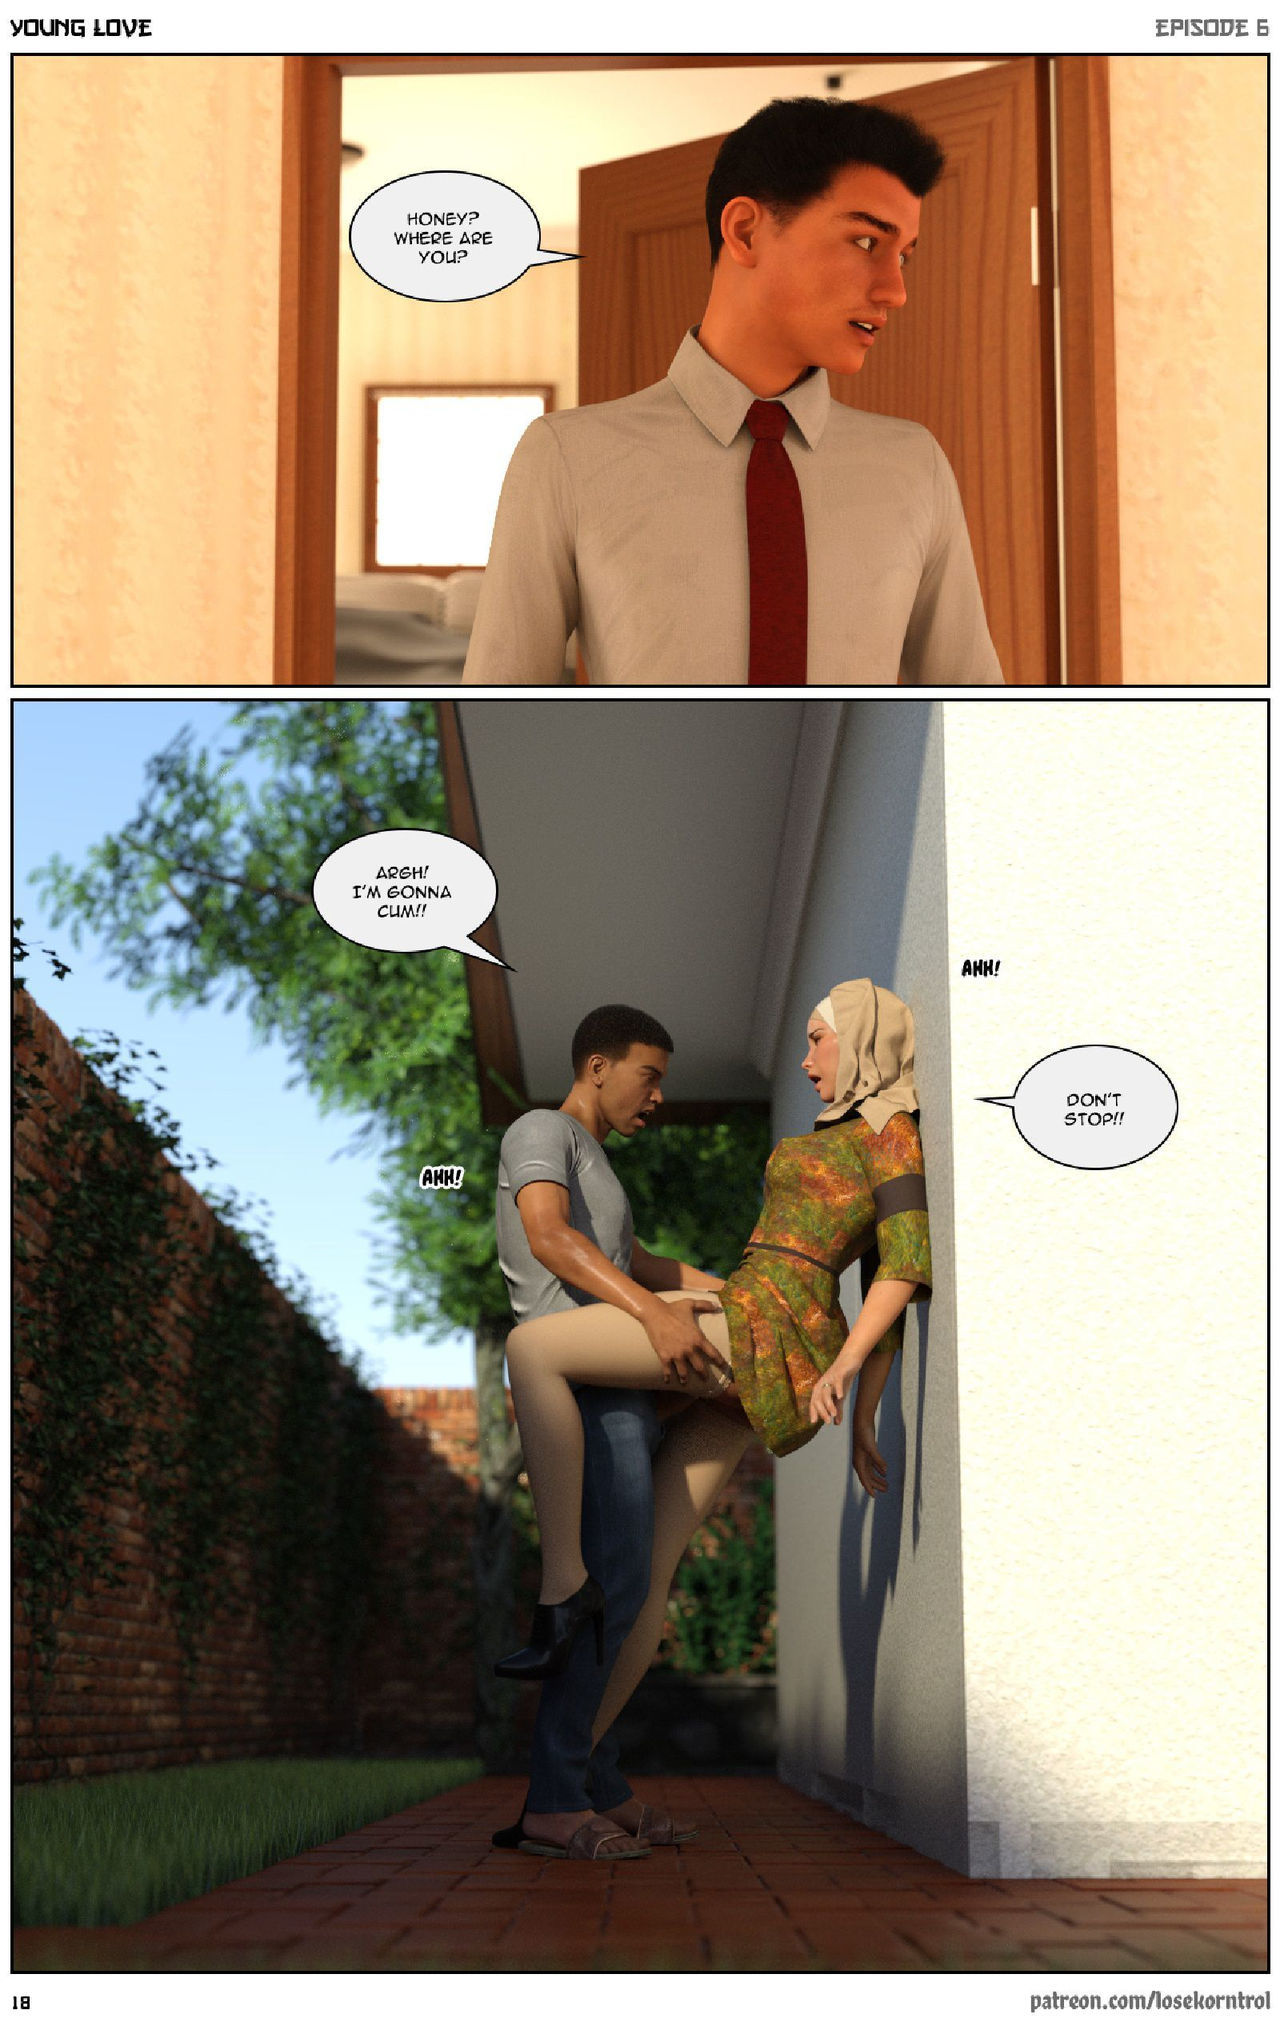 Young Love 6 - Losekorntrol page 18